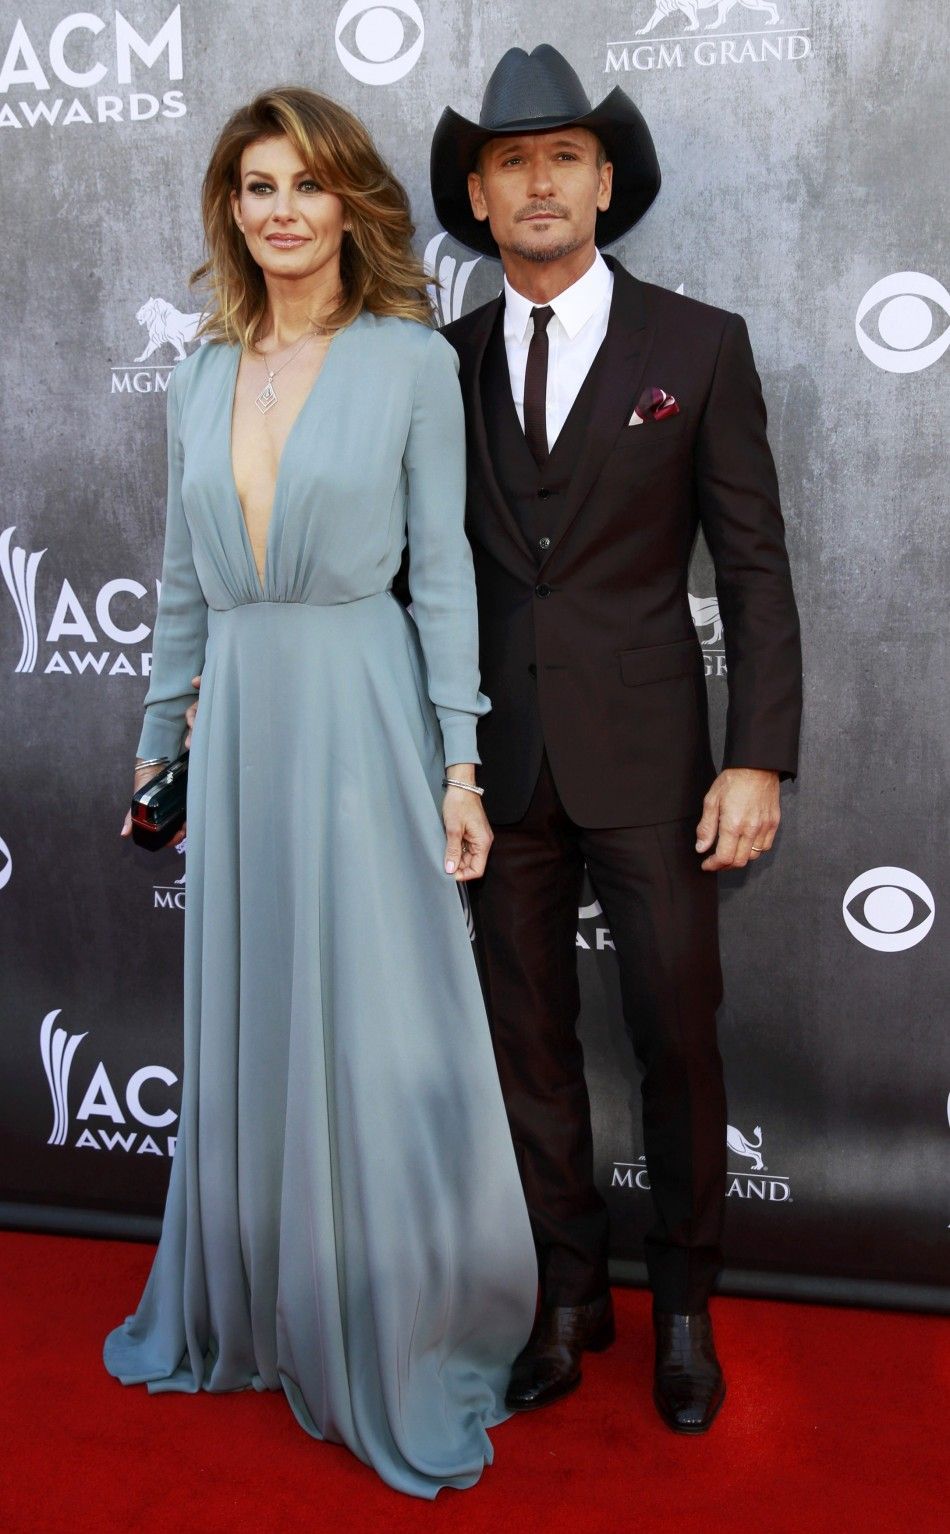 Faith Hill and Tim McGraw arrive at the 49th Annual Academy of Country Music Awards in Las Vegas